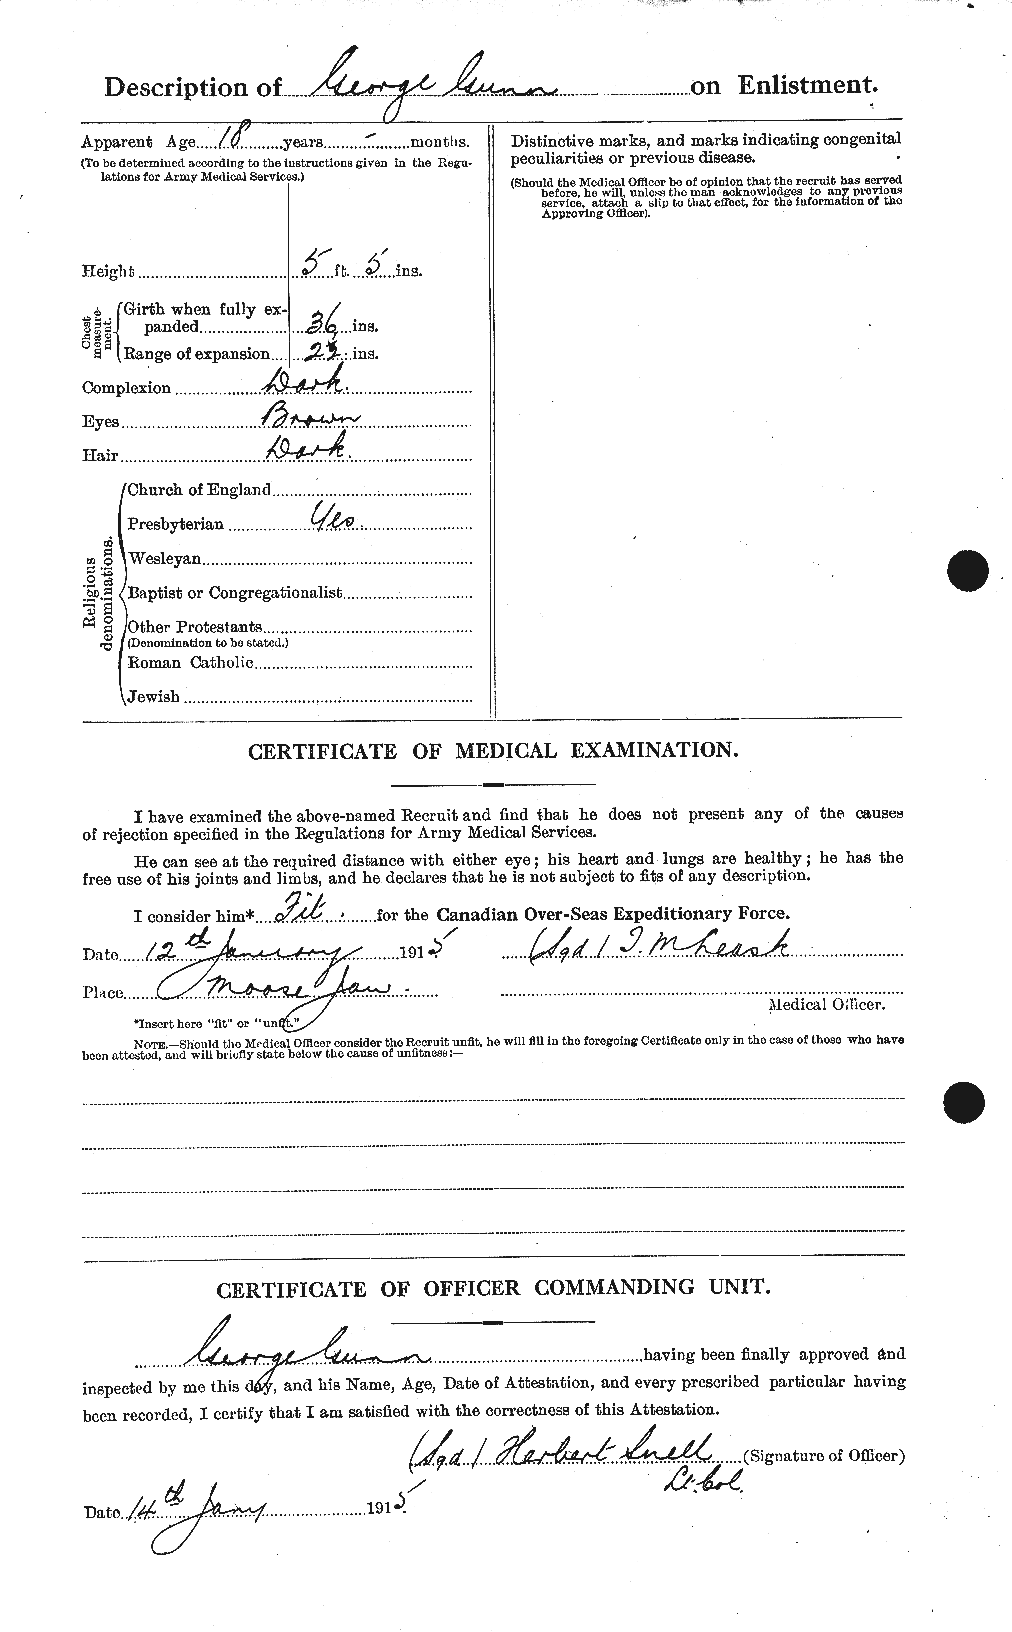 Personnel Records of the First World War - CEF 369237b